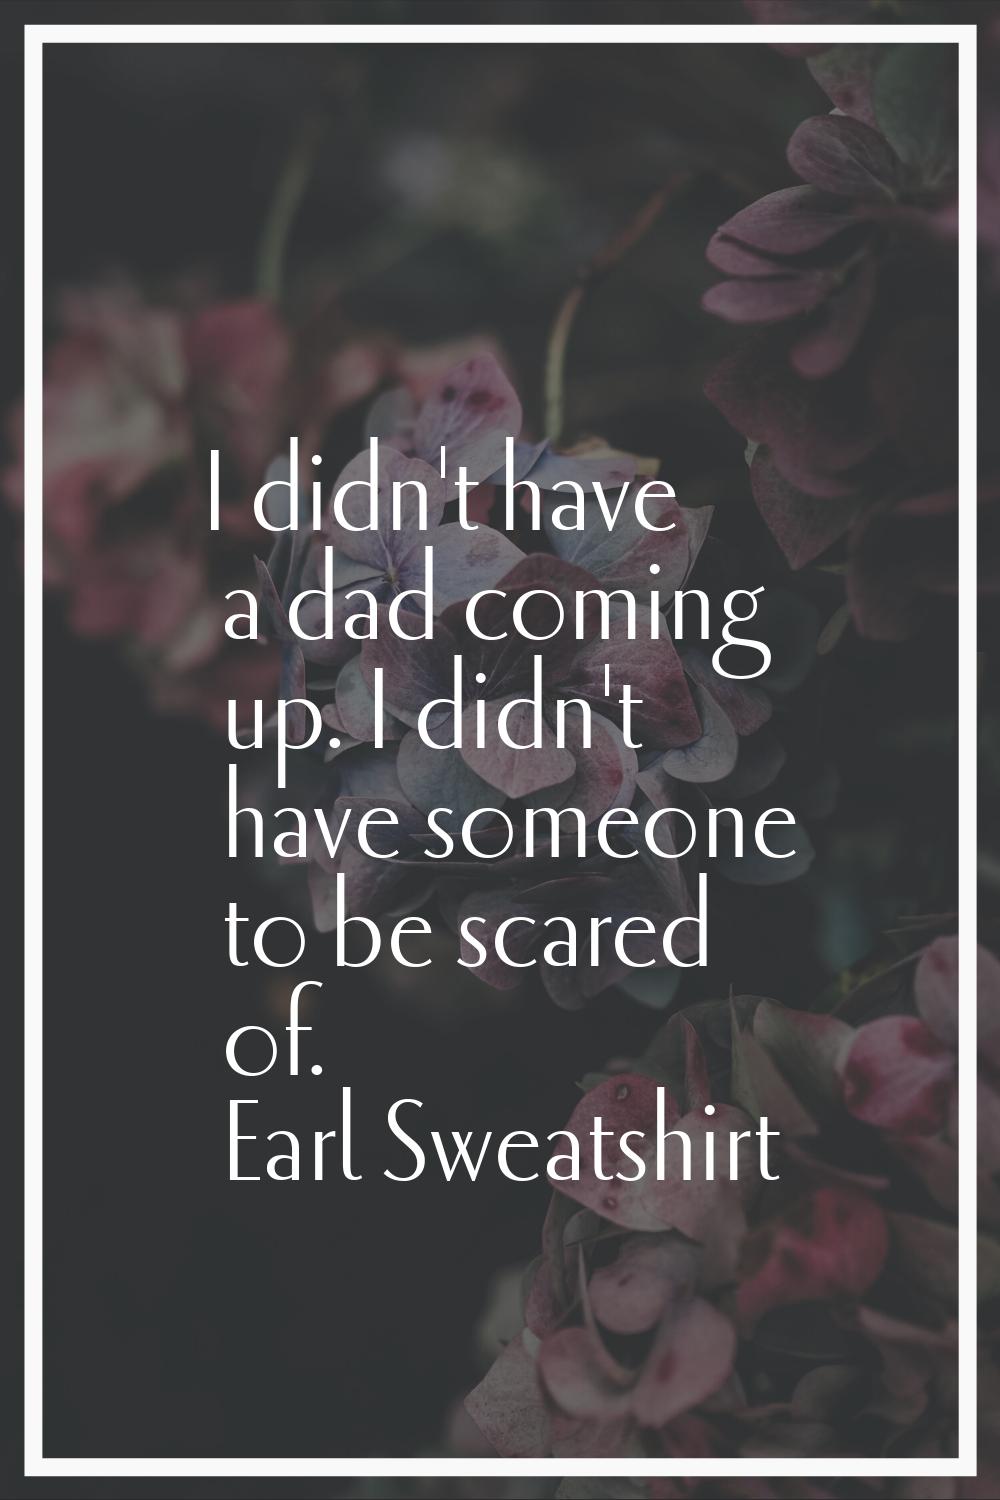 I didn't have a dad coming up. I didn't have someone to be scared of.